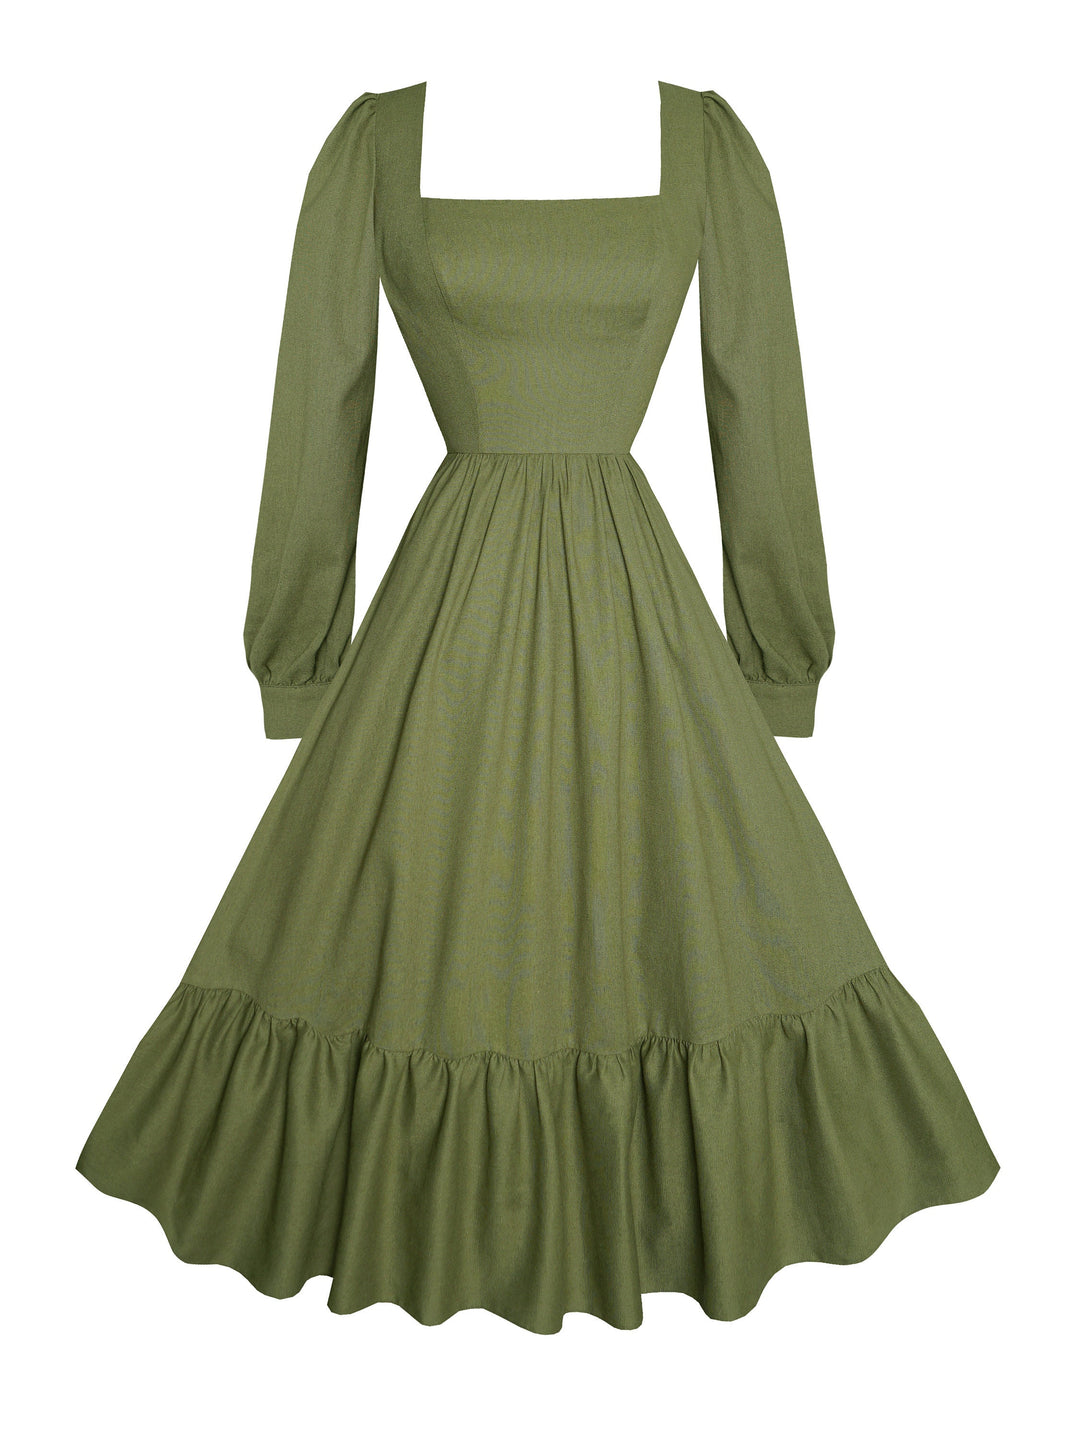 MTO - Mary Dress in Hunters Green Linen